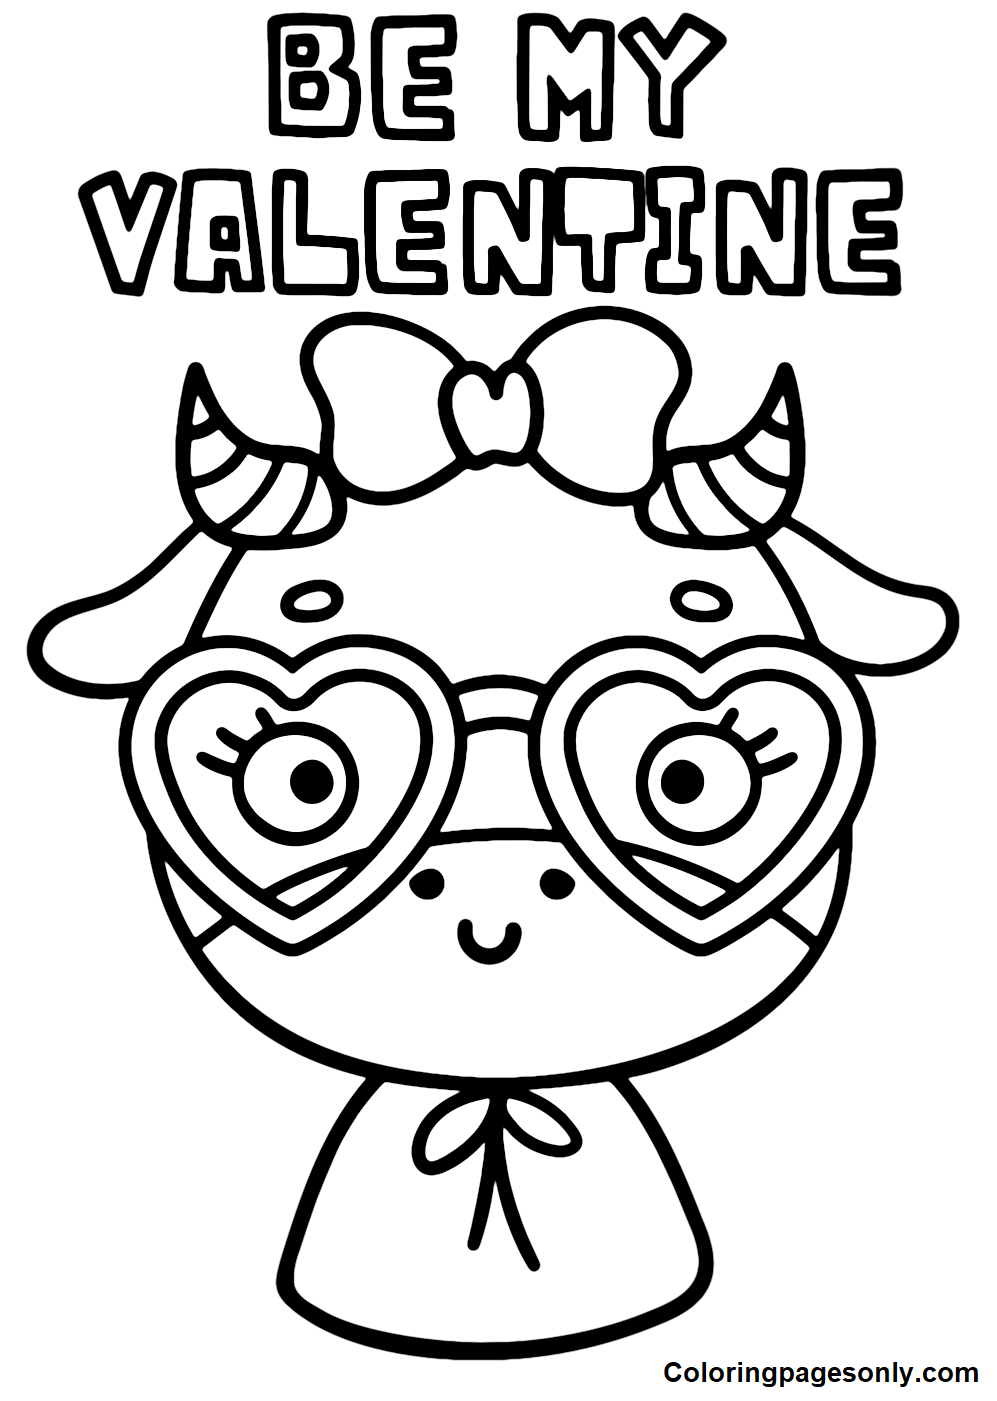 Cute Cow in Valentine’s Day Coloring Page